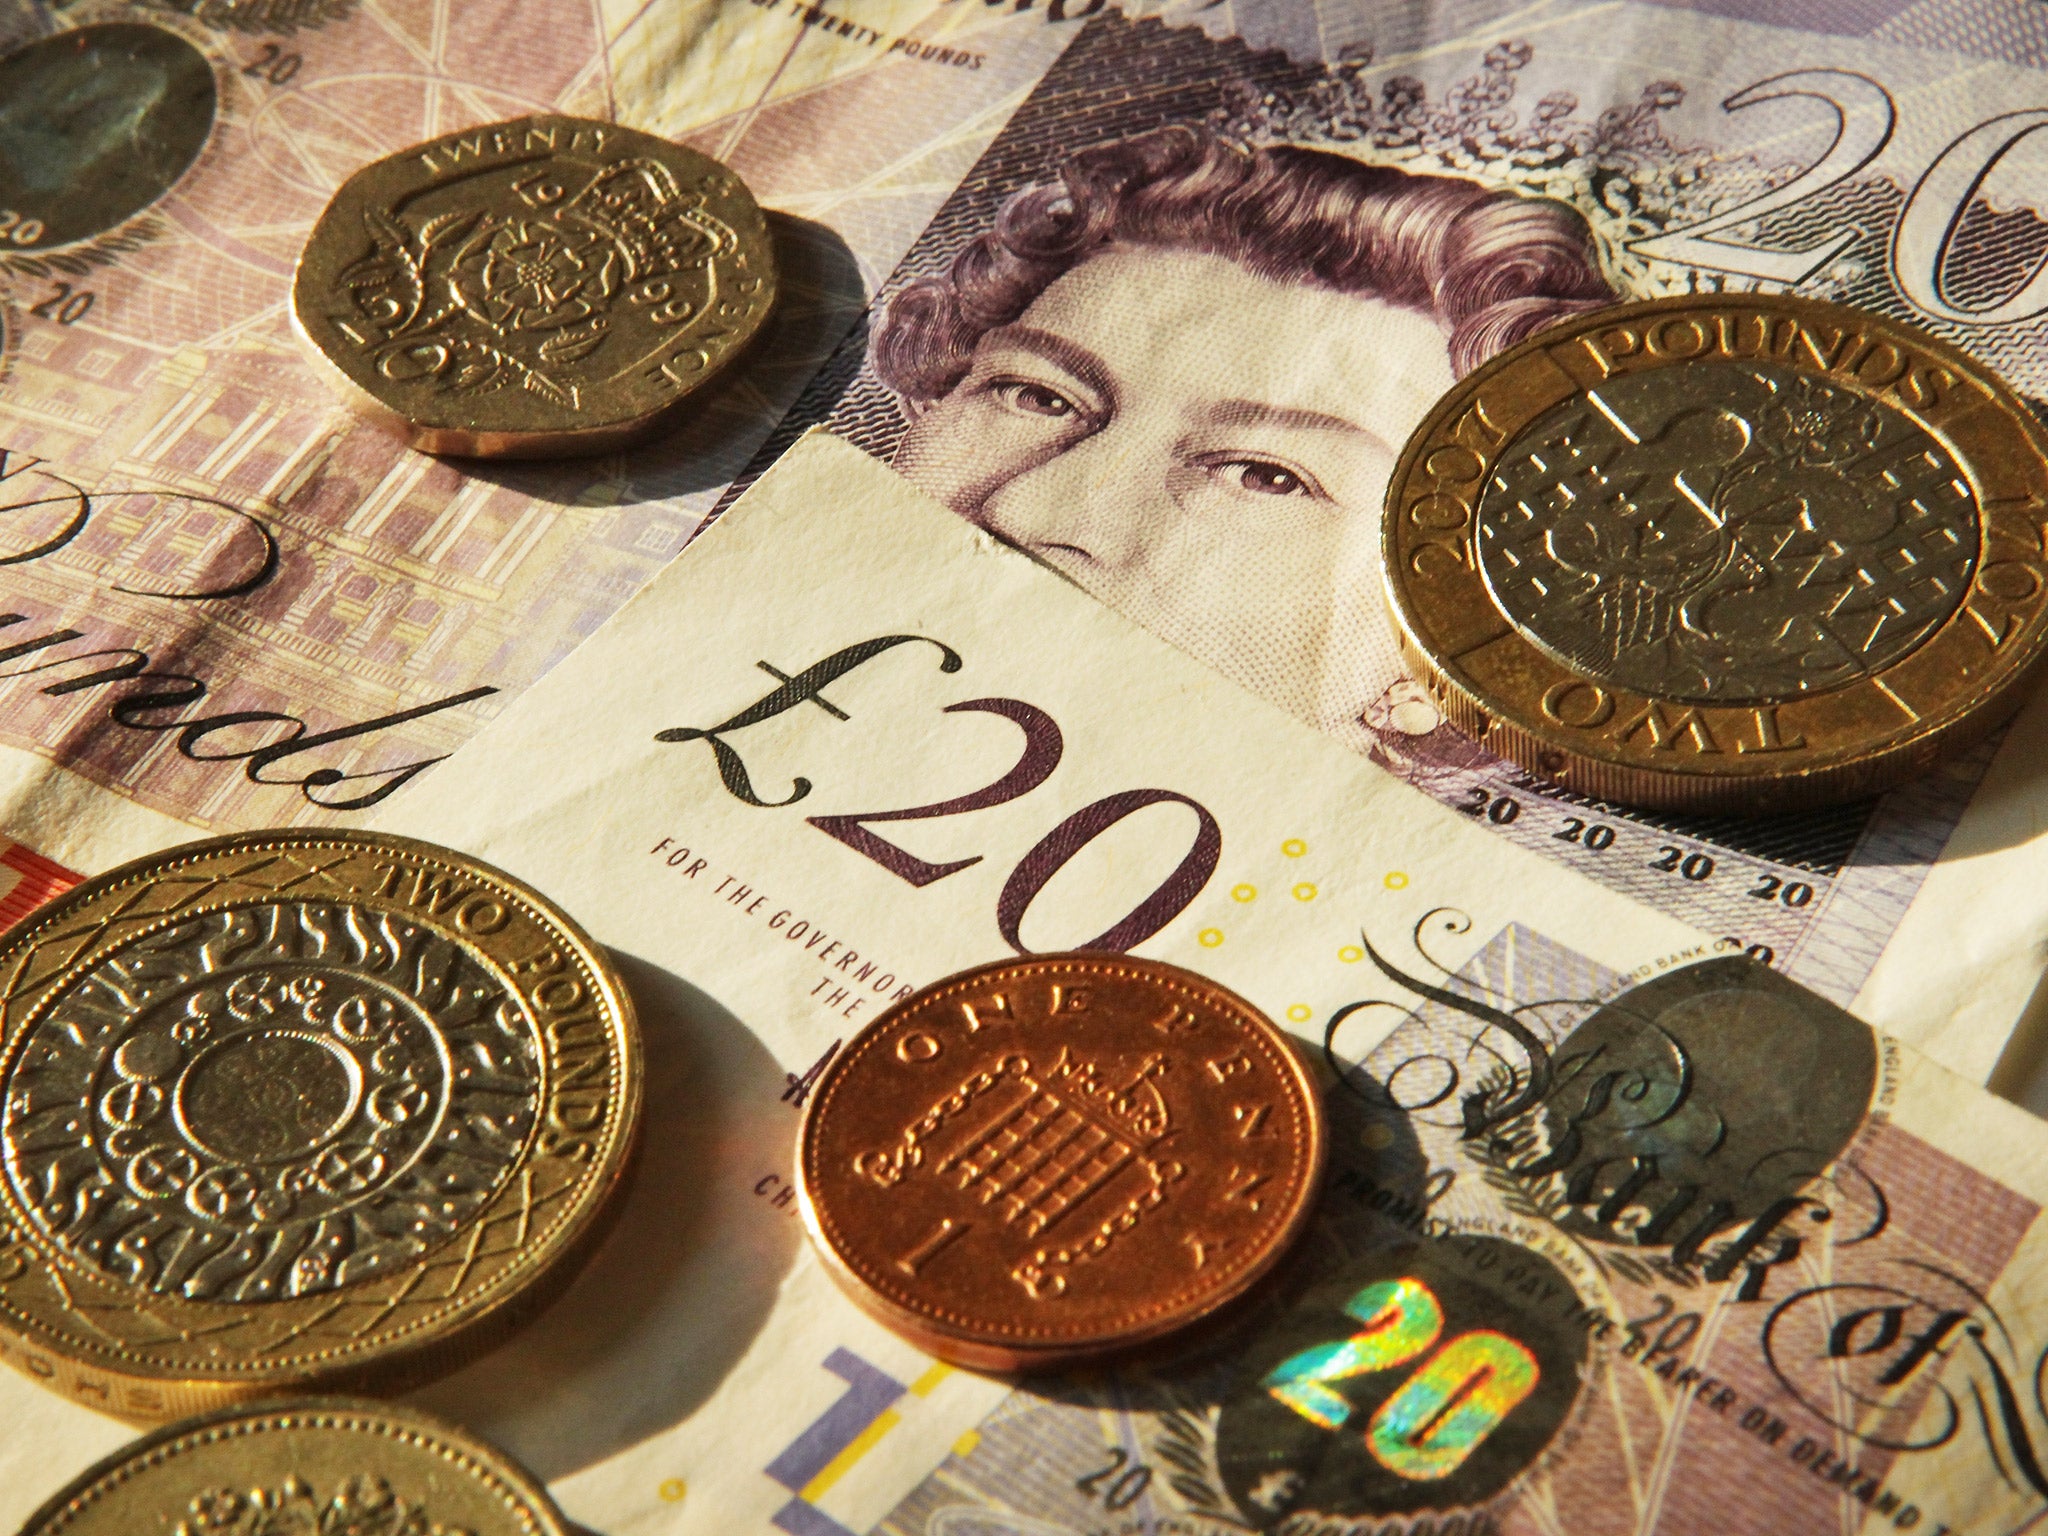 The minimum wage for workers aged 21-24 will increase to £7.70 in April, and to £8.21 for those aged 25 and over